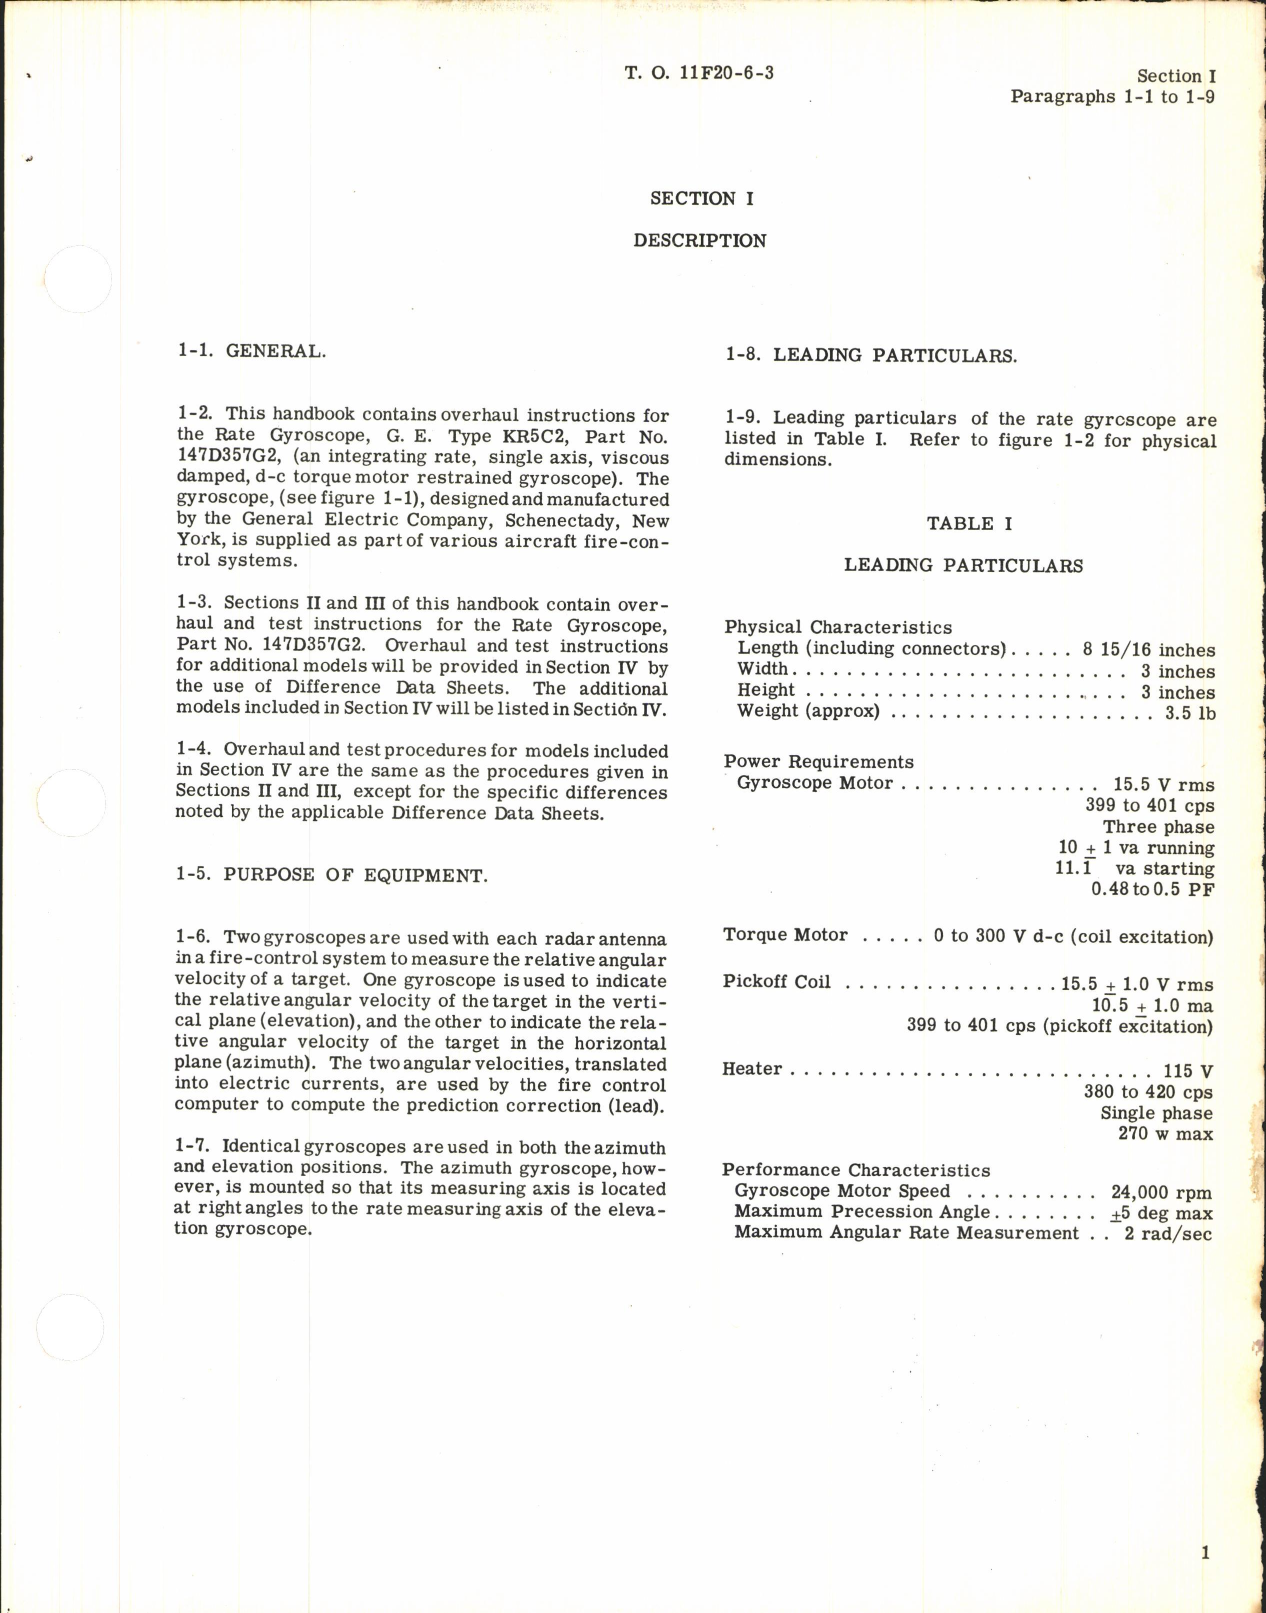 Sample page 5 from AirCorps Library document: Overhaul Instructions for Rate Gyroscope Part No. 147D357G2, Type KR-5C2